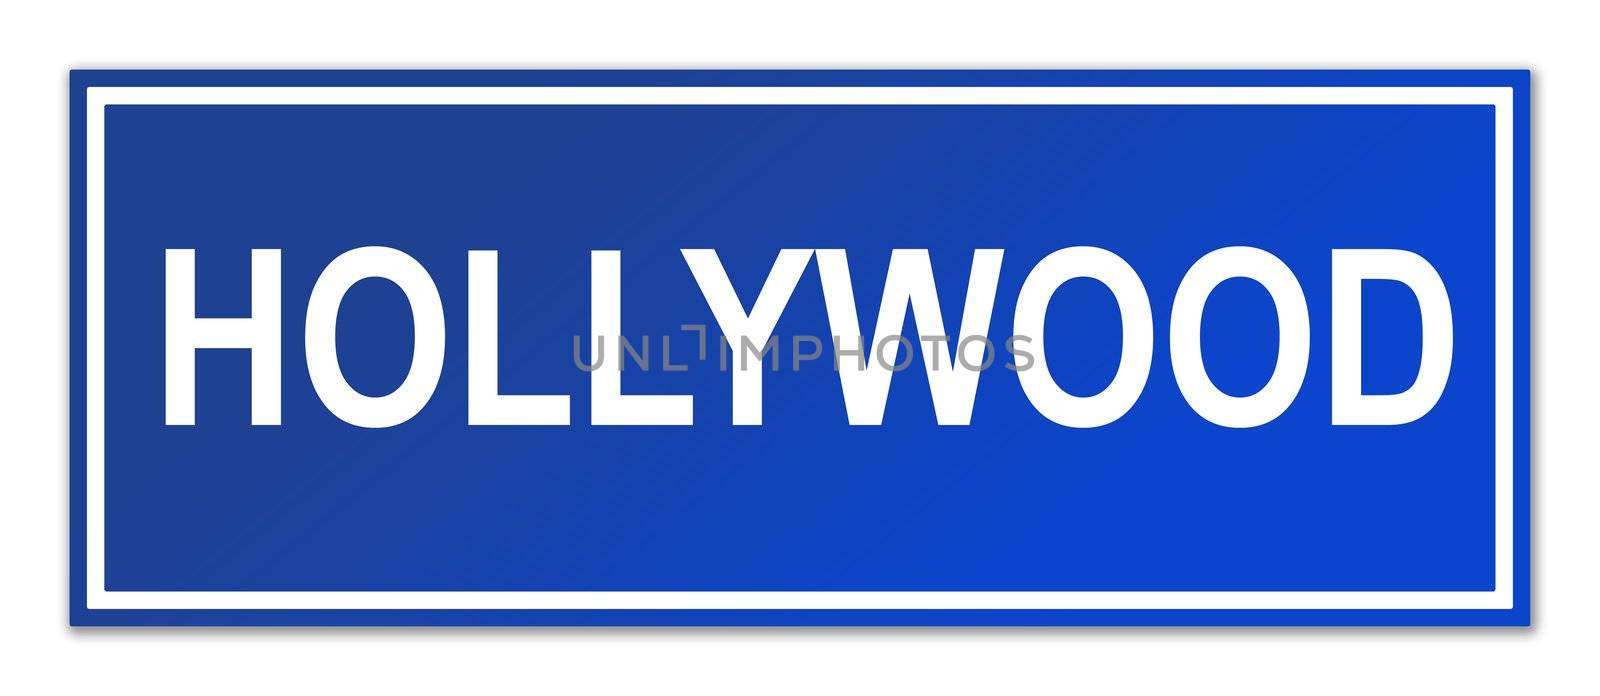 Hollywood street sign isolated on white background with copy space.